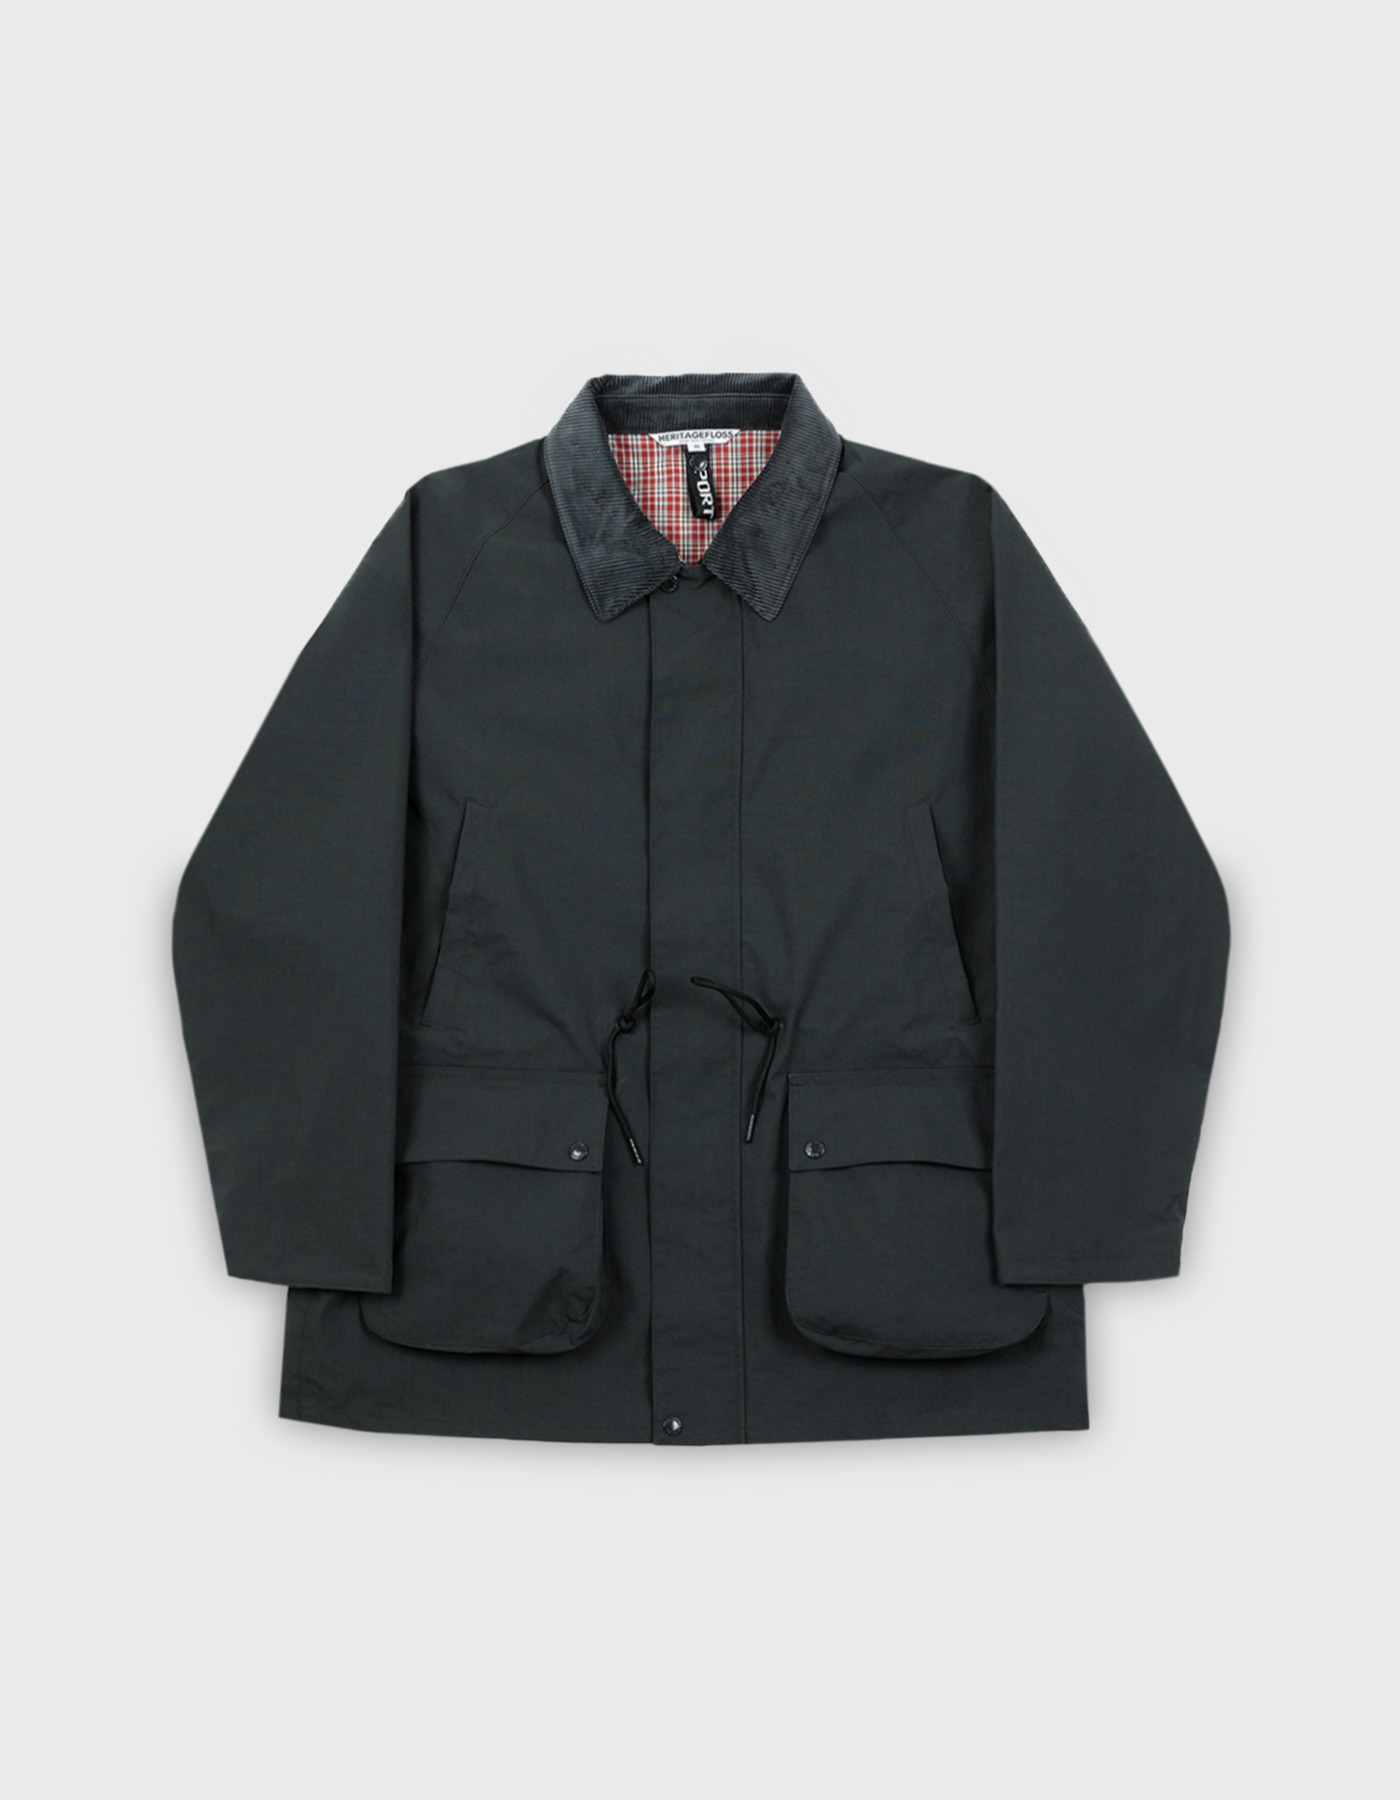 S&amp;C FIELD JACKET / Charcoal